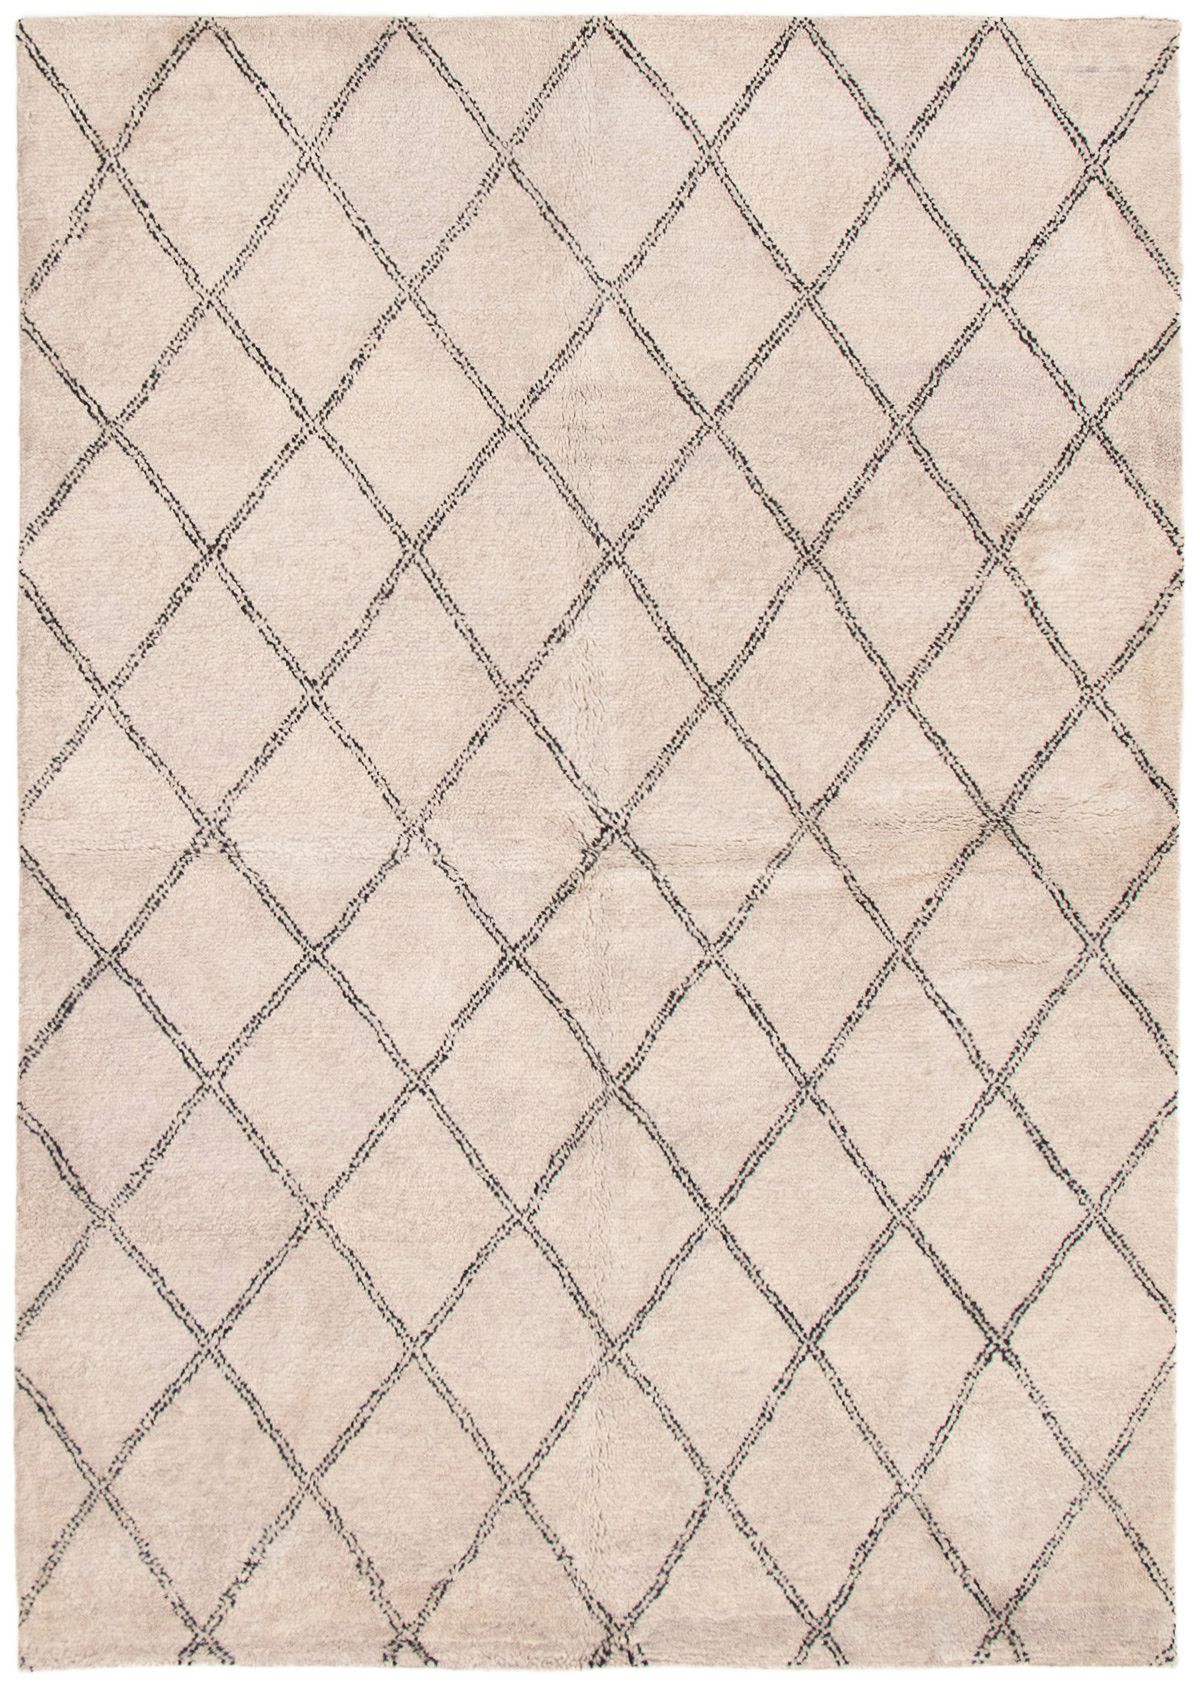 Hand-knotted Arlequin Light Grey Wool Rug 6'3" x 8'10" Size: 6'3" x 8'10"  